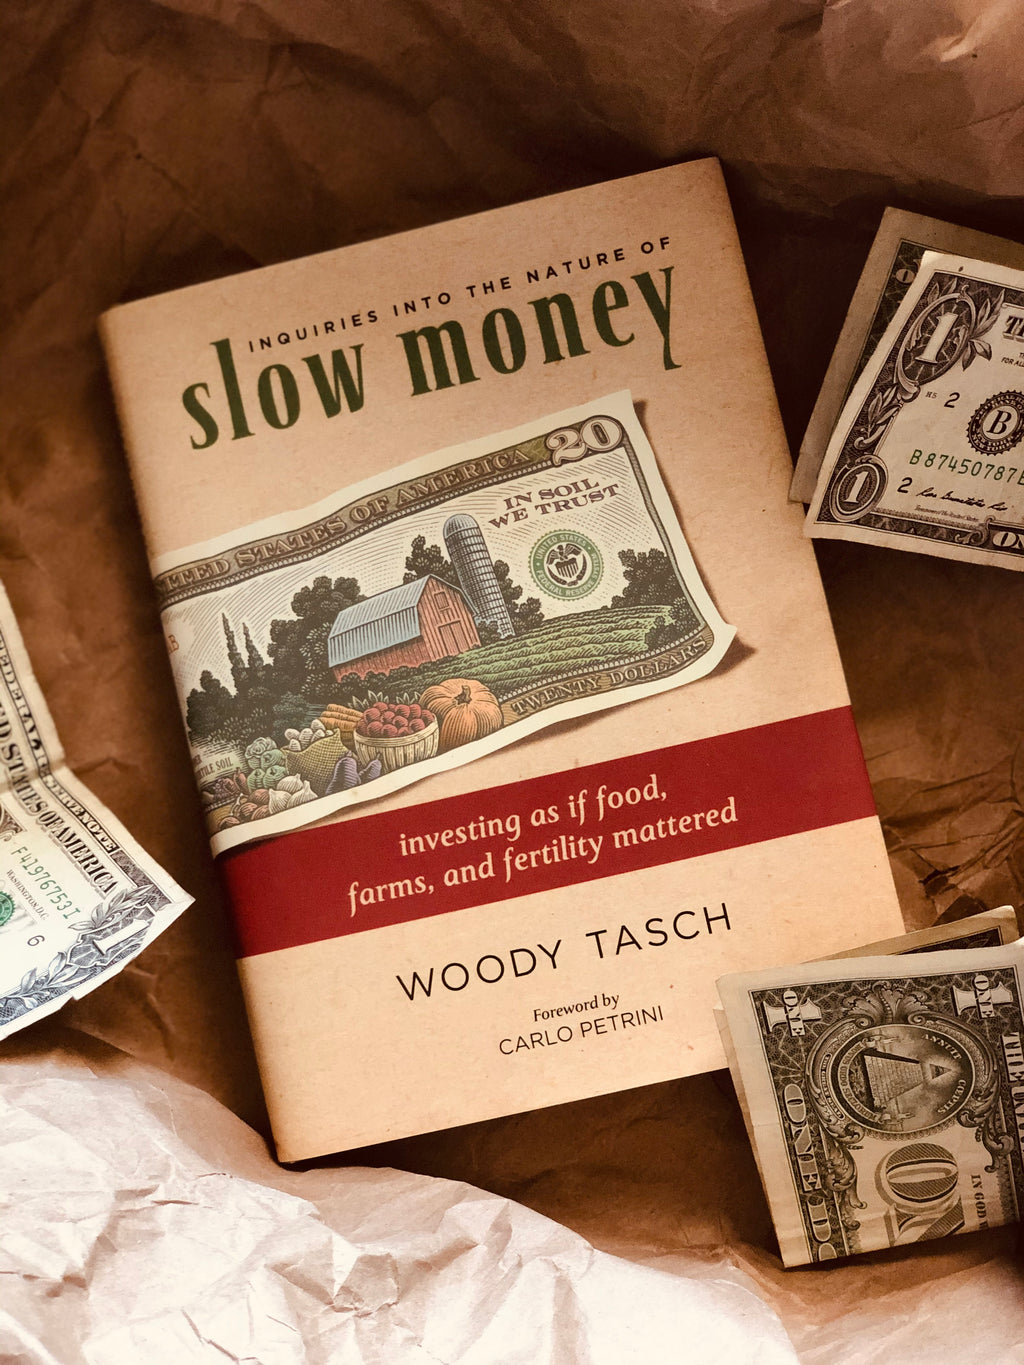 Inquiries Into The Nature of Slow Money- By Woody Tasch